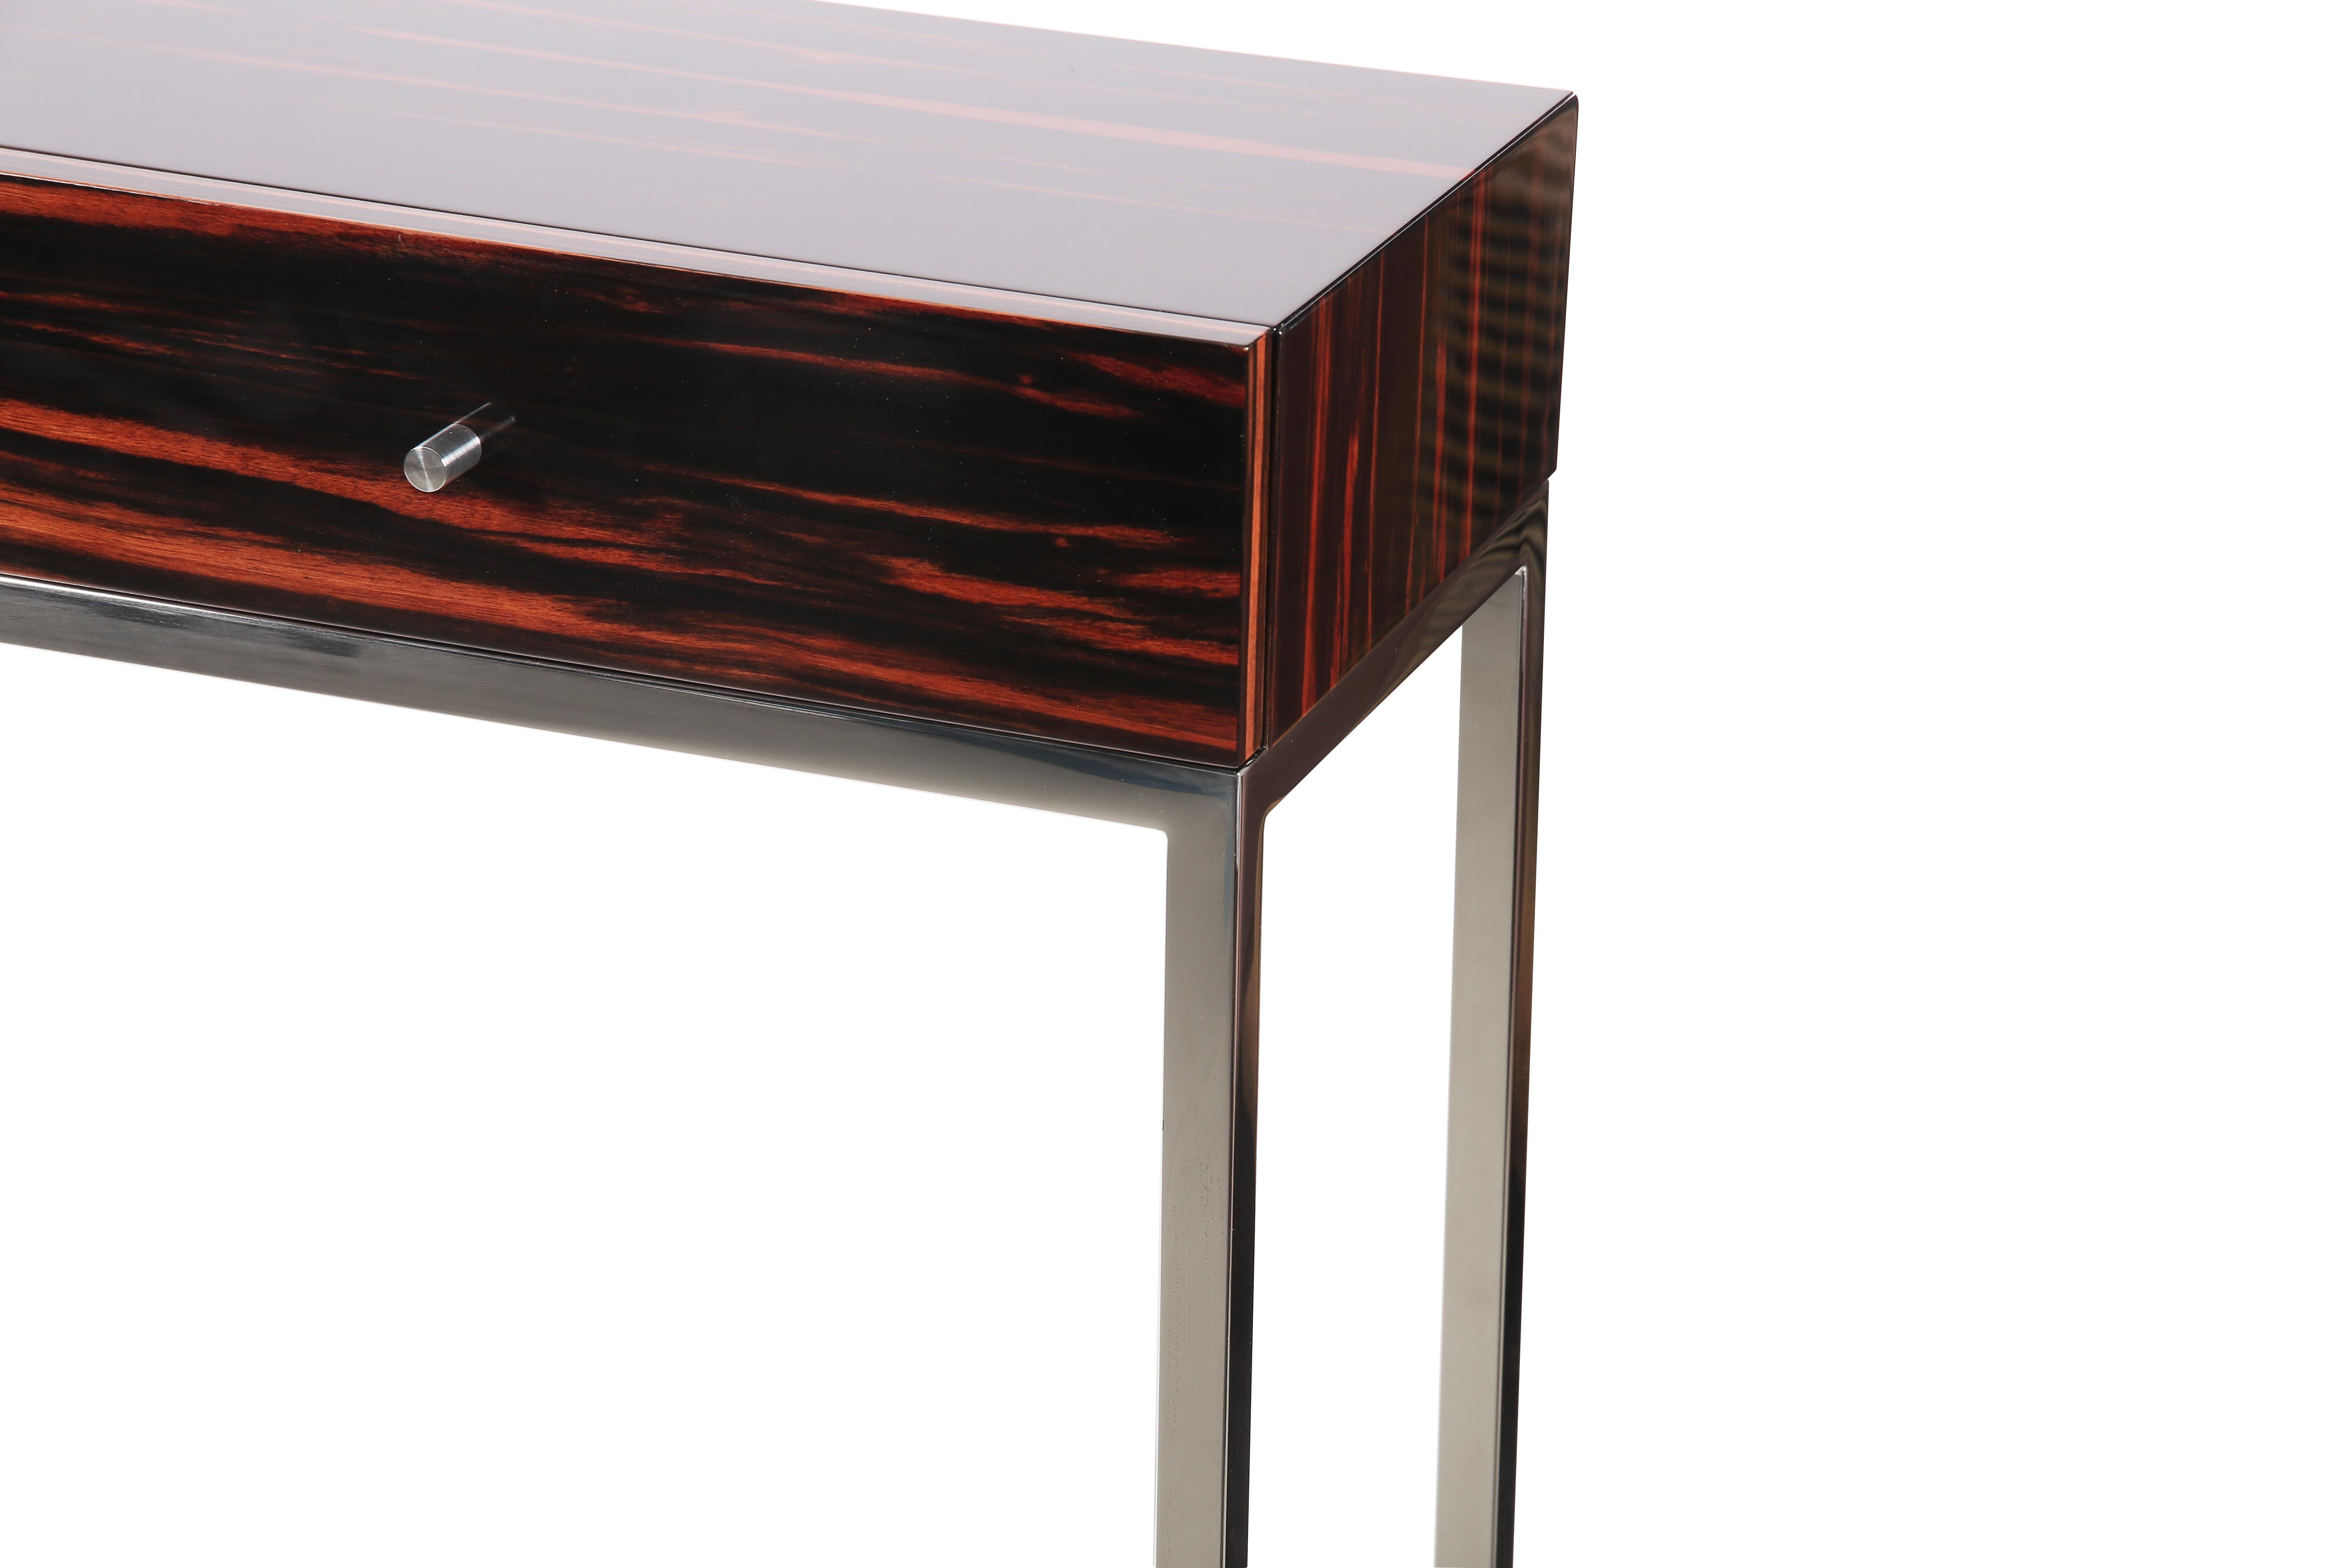 Lacquered Contemporary Hermes Console in Macassar Ebony, High Gloss Finish For Sale